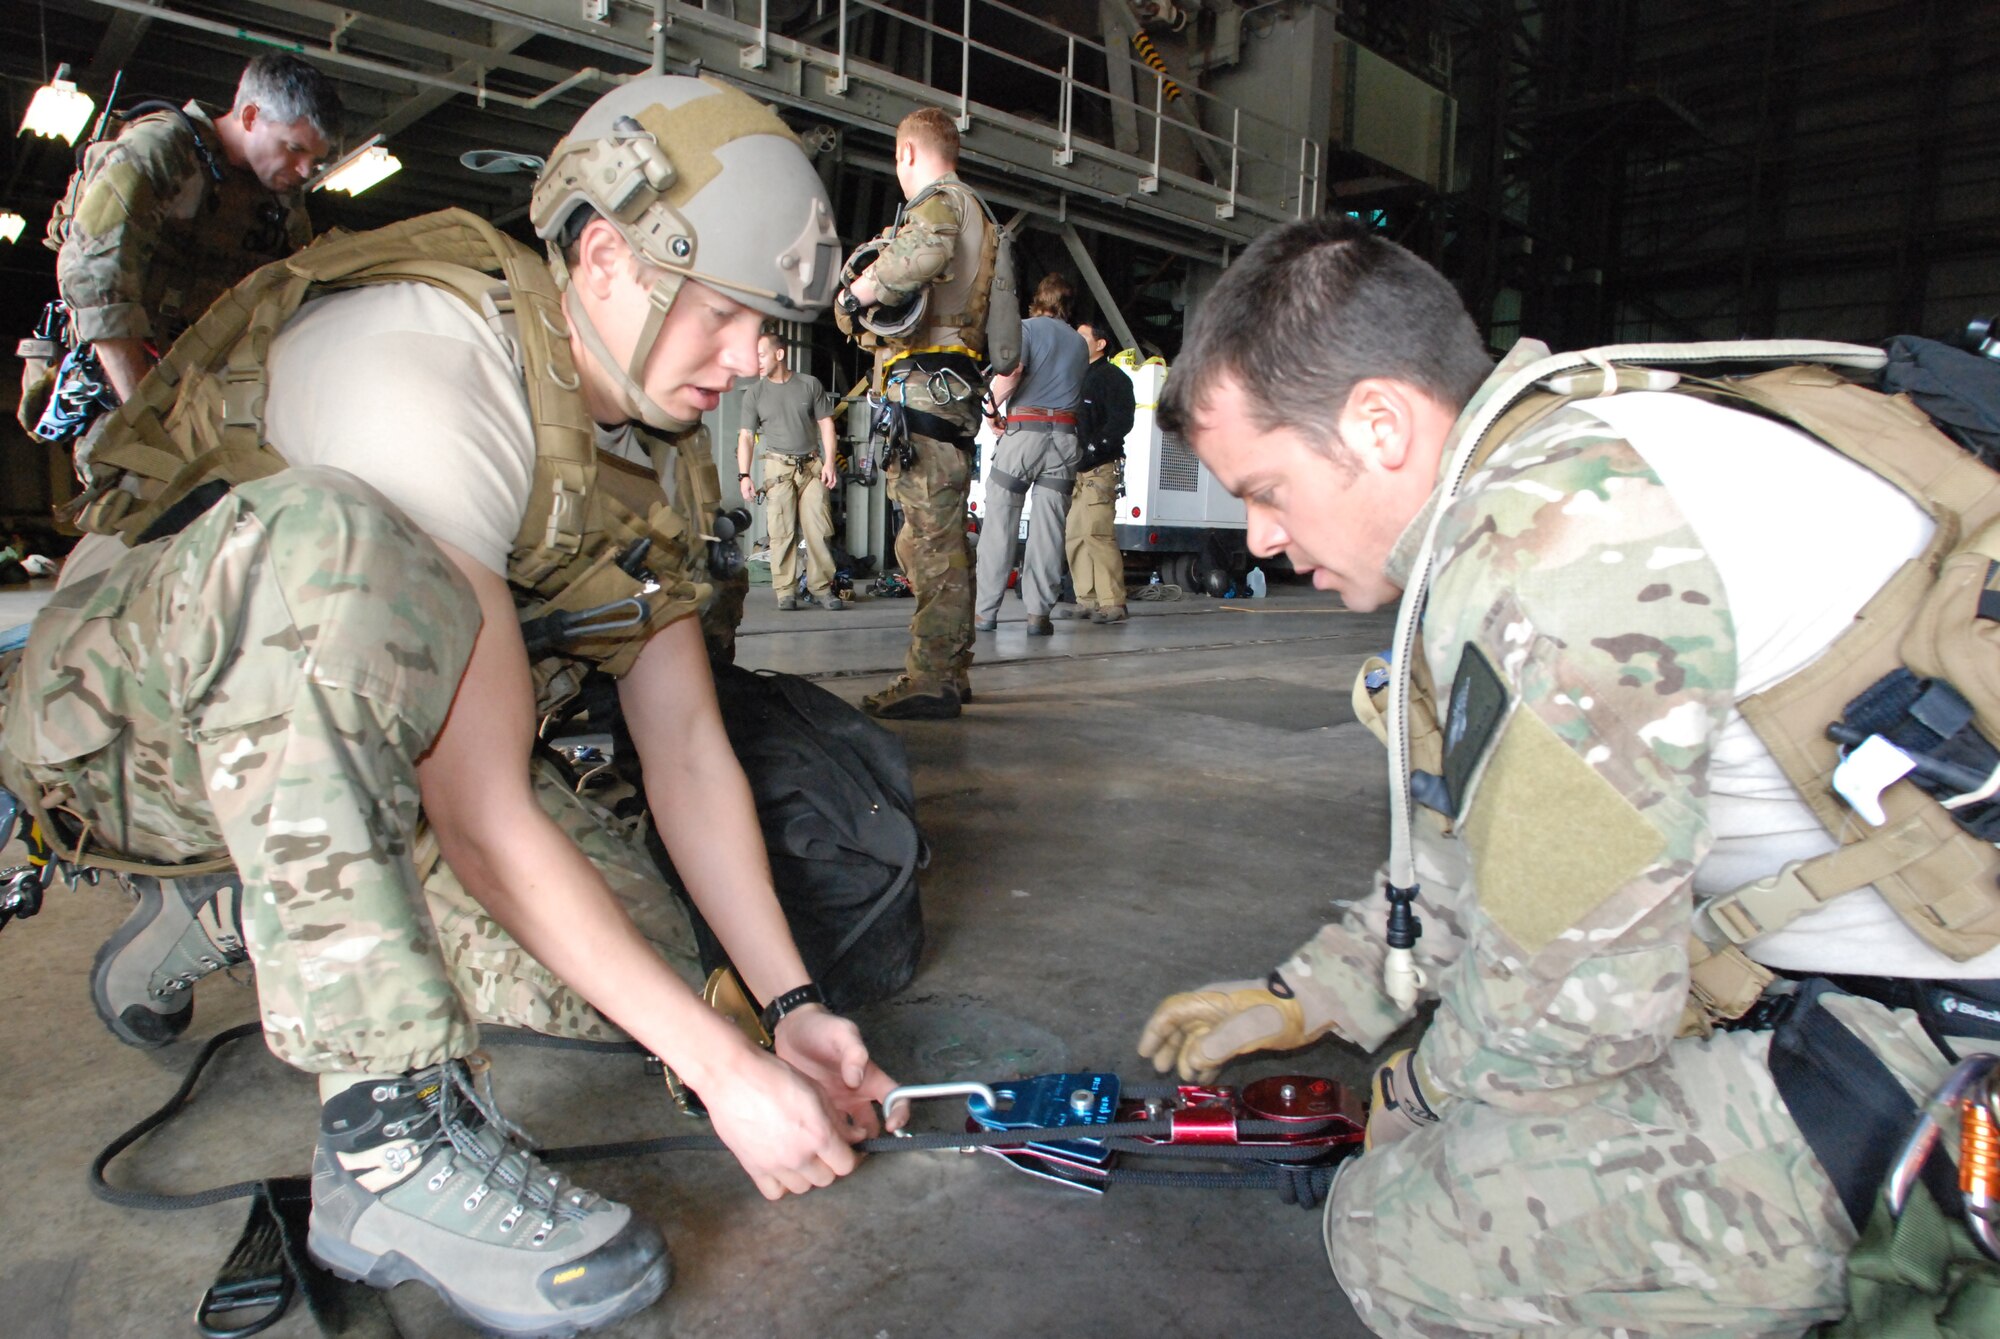 CAPE CANAVERAL AIR FORCE STATION, Fla. - Senior Airman Eric Humphrey, reserve pararescueman from Davis-Monthan Air Force Base, Ariz., and Master Sgt. Joe Traska, reserve pararescueman with the 920th Rescue Wing, Cocoa Beach, Fla., prepare their ropes and pulleys for rescue training. The training, by ROCO Rescue, is high-angle, high-altitude and confined space rescue refresher for the PJs and combat rescue officers.   (U.S. Air Force photo/Staff Sgt. Leslie Kraushaar)